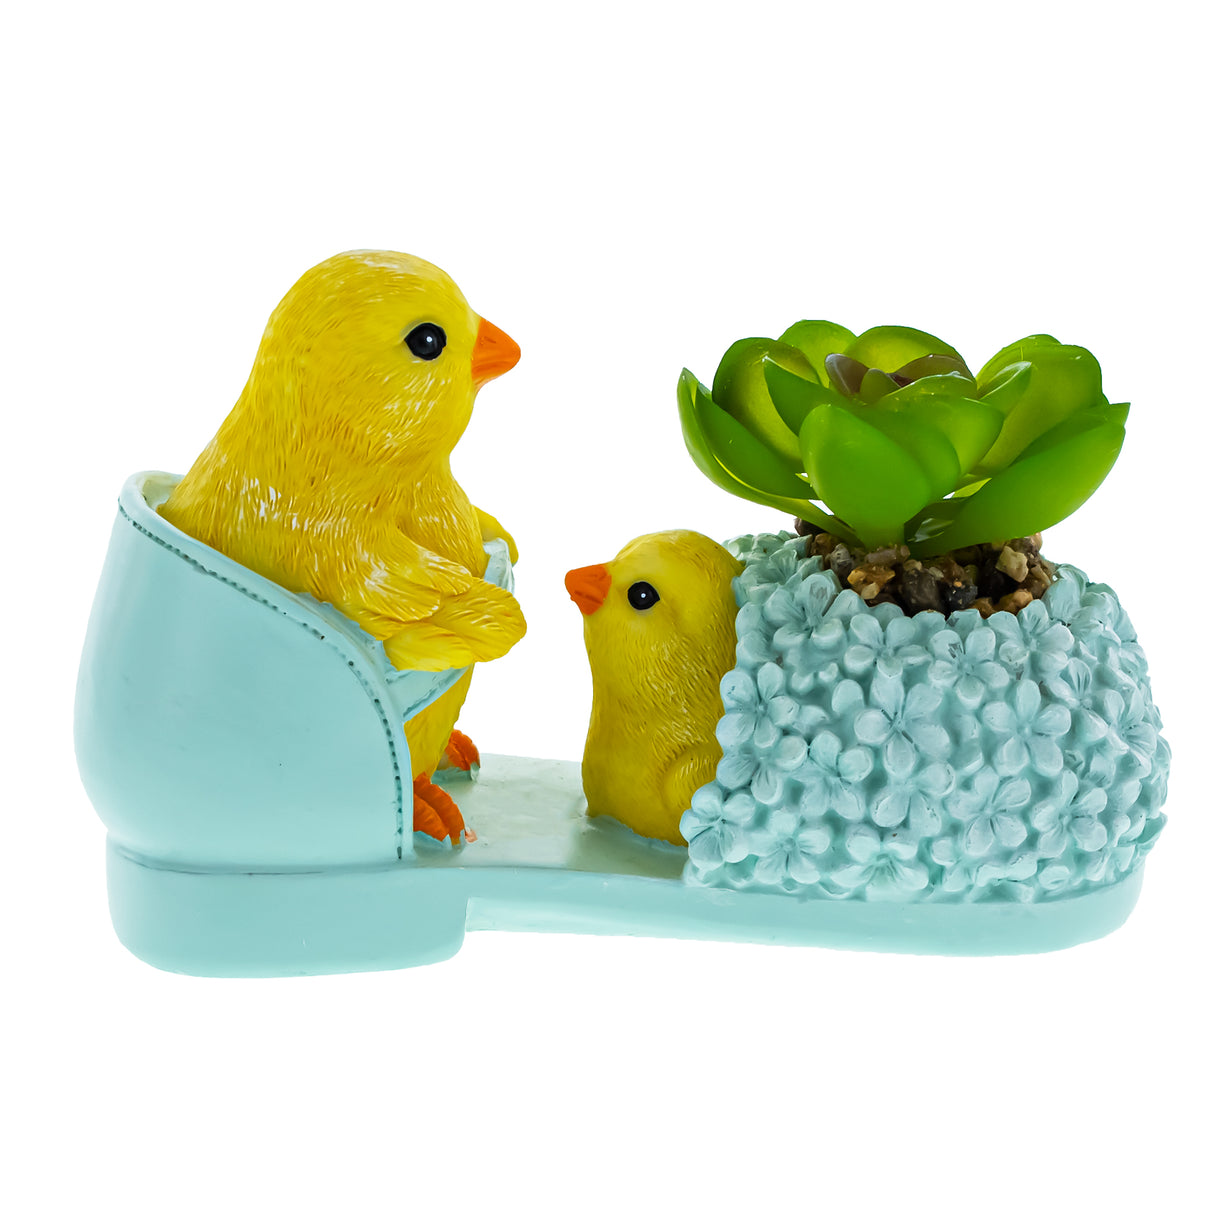 Chick Duo Nestled in Shoe: Floral Pot Figurine ,dimensions in inches: 3.4 x 2.5 x 5.6